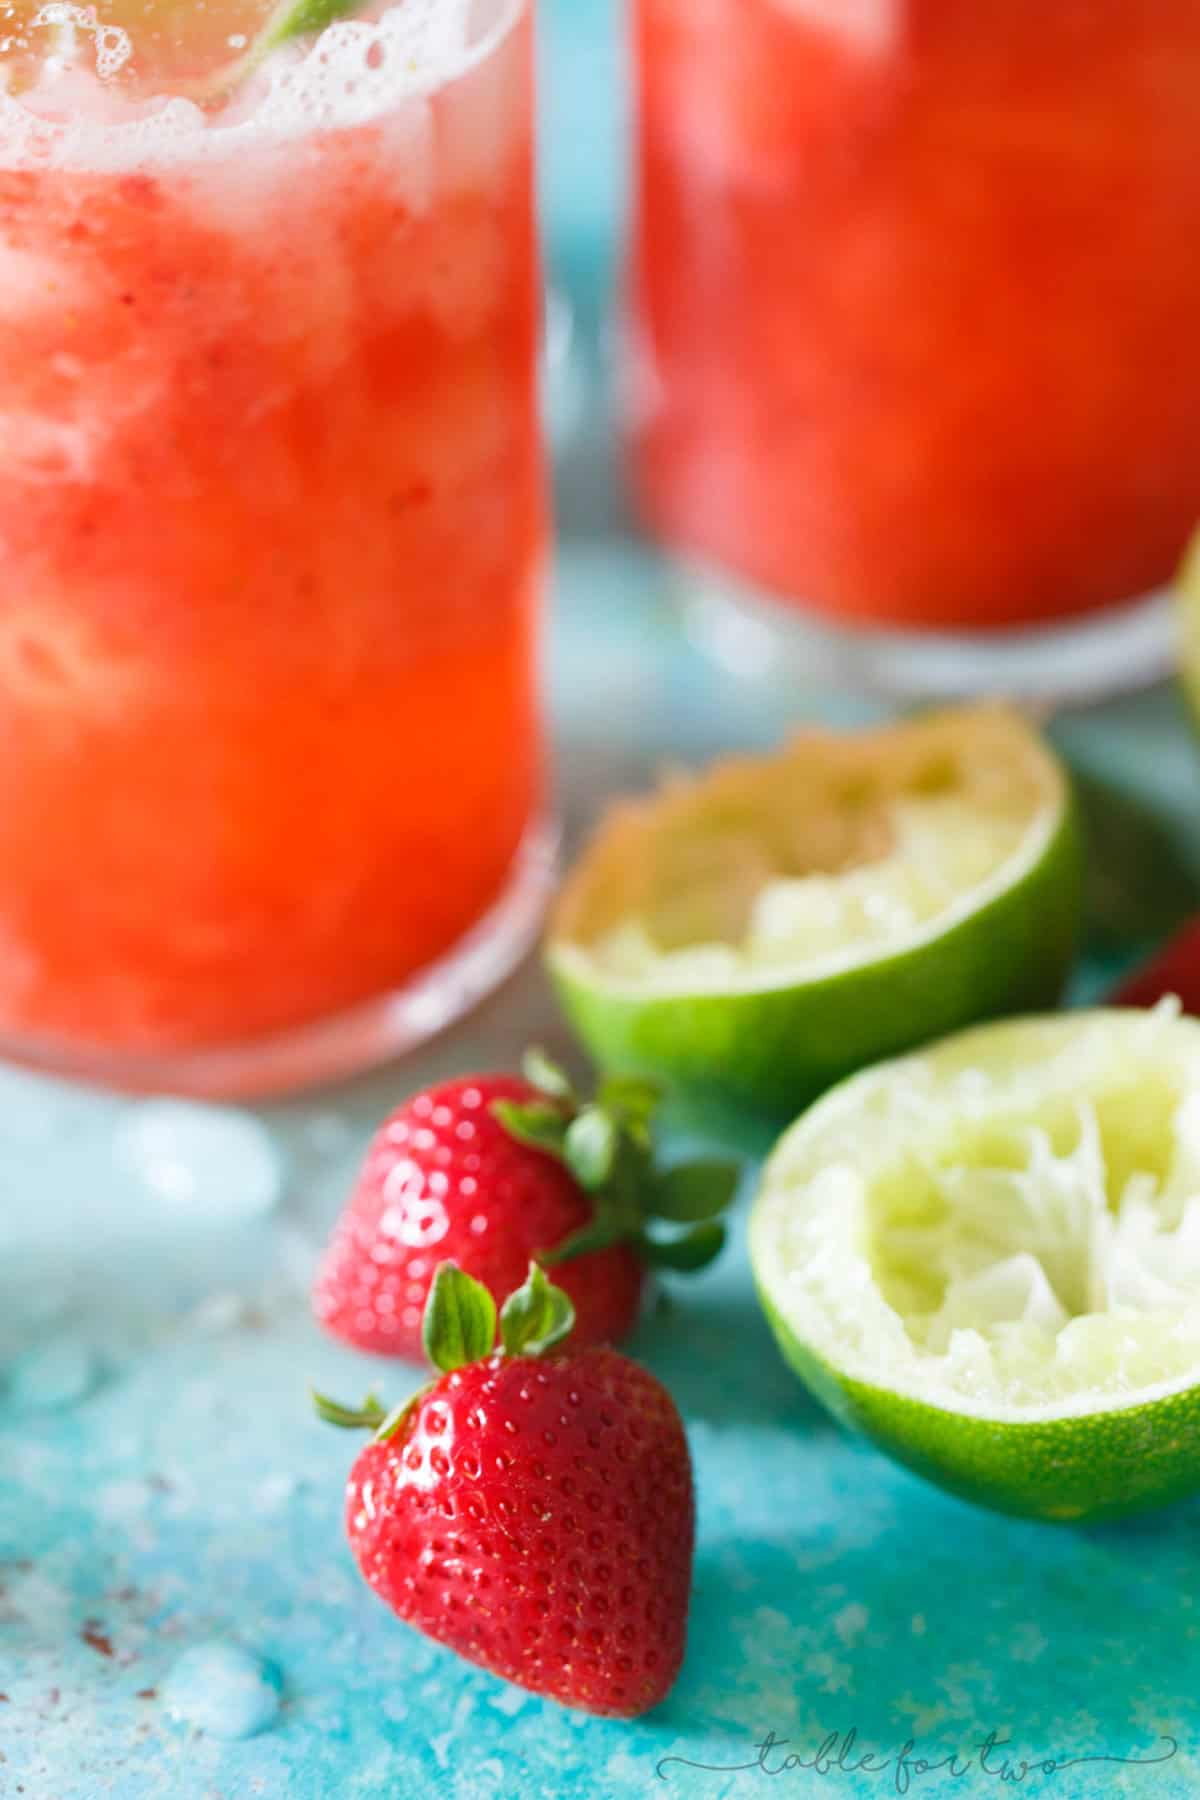 This refreshing strawberry rosé mint limeade is made with fresh seasonal ingredients! You will love sipping on this at your next outdoor party or get-together! Fresh strawberries are key and the refreshing mint and tangy lime juice rounds out the flavors of this drink perfectly! Serve with or without alcohol!